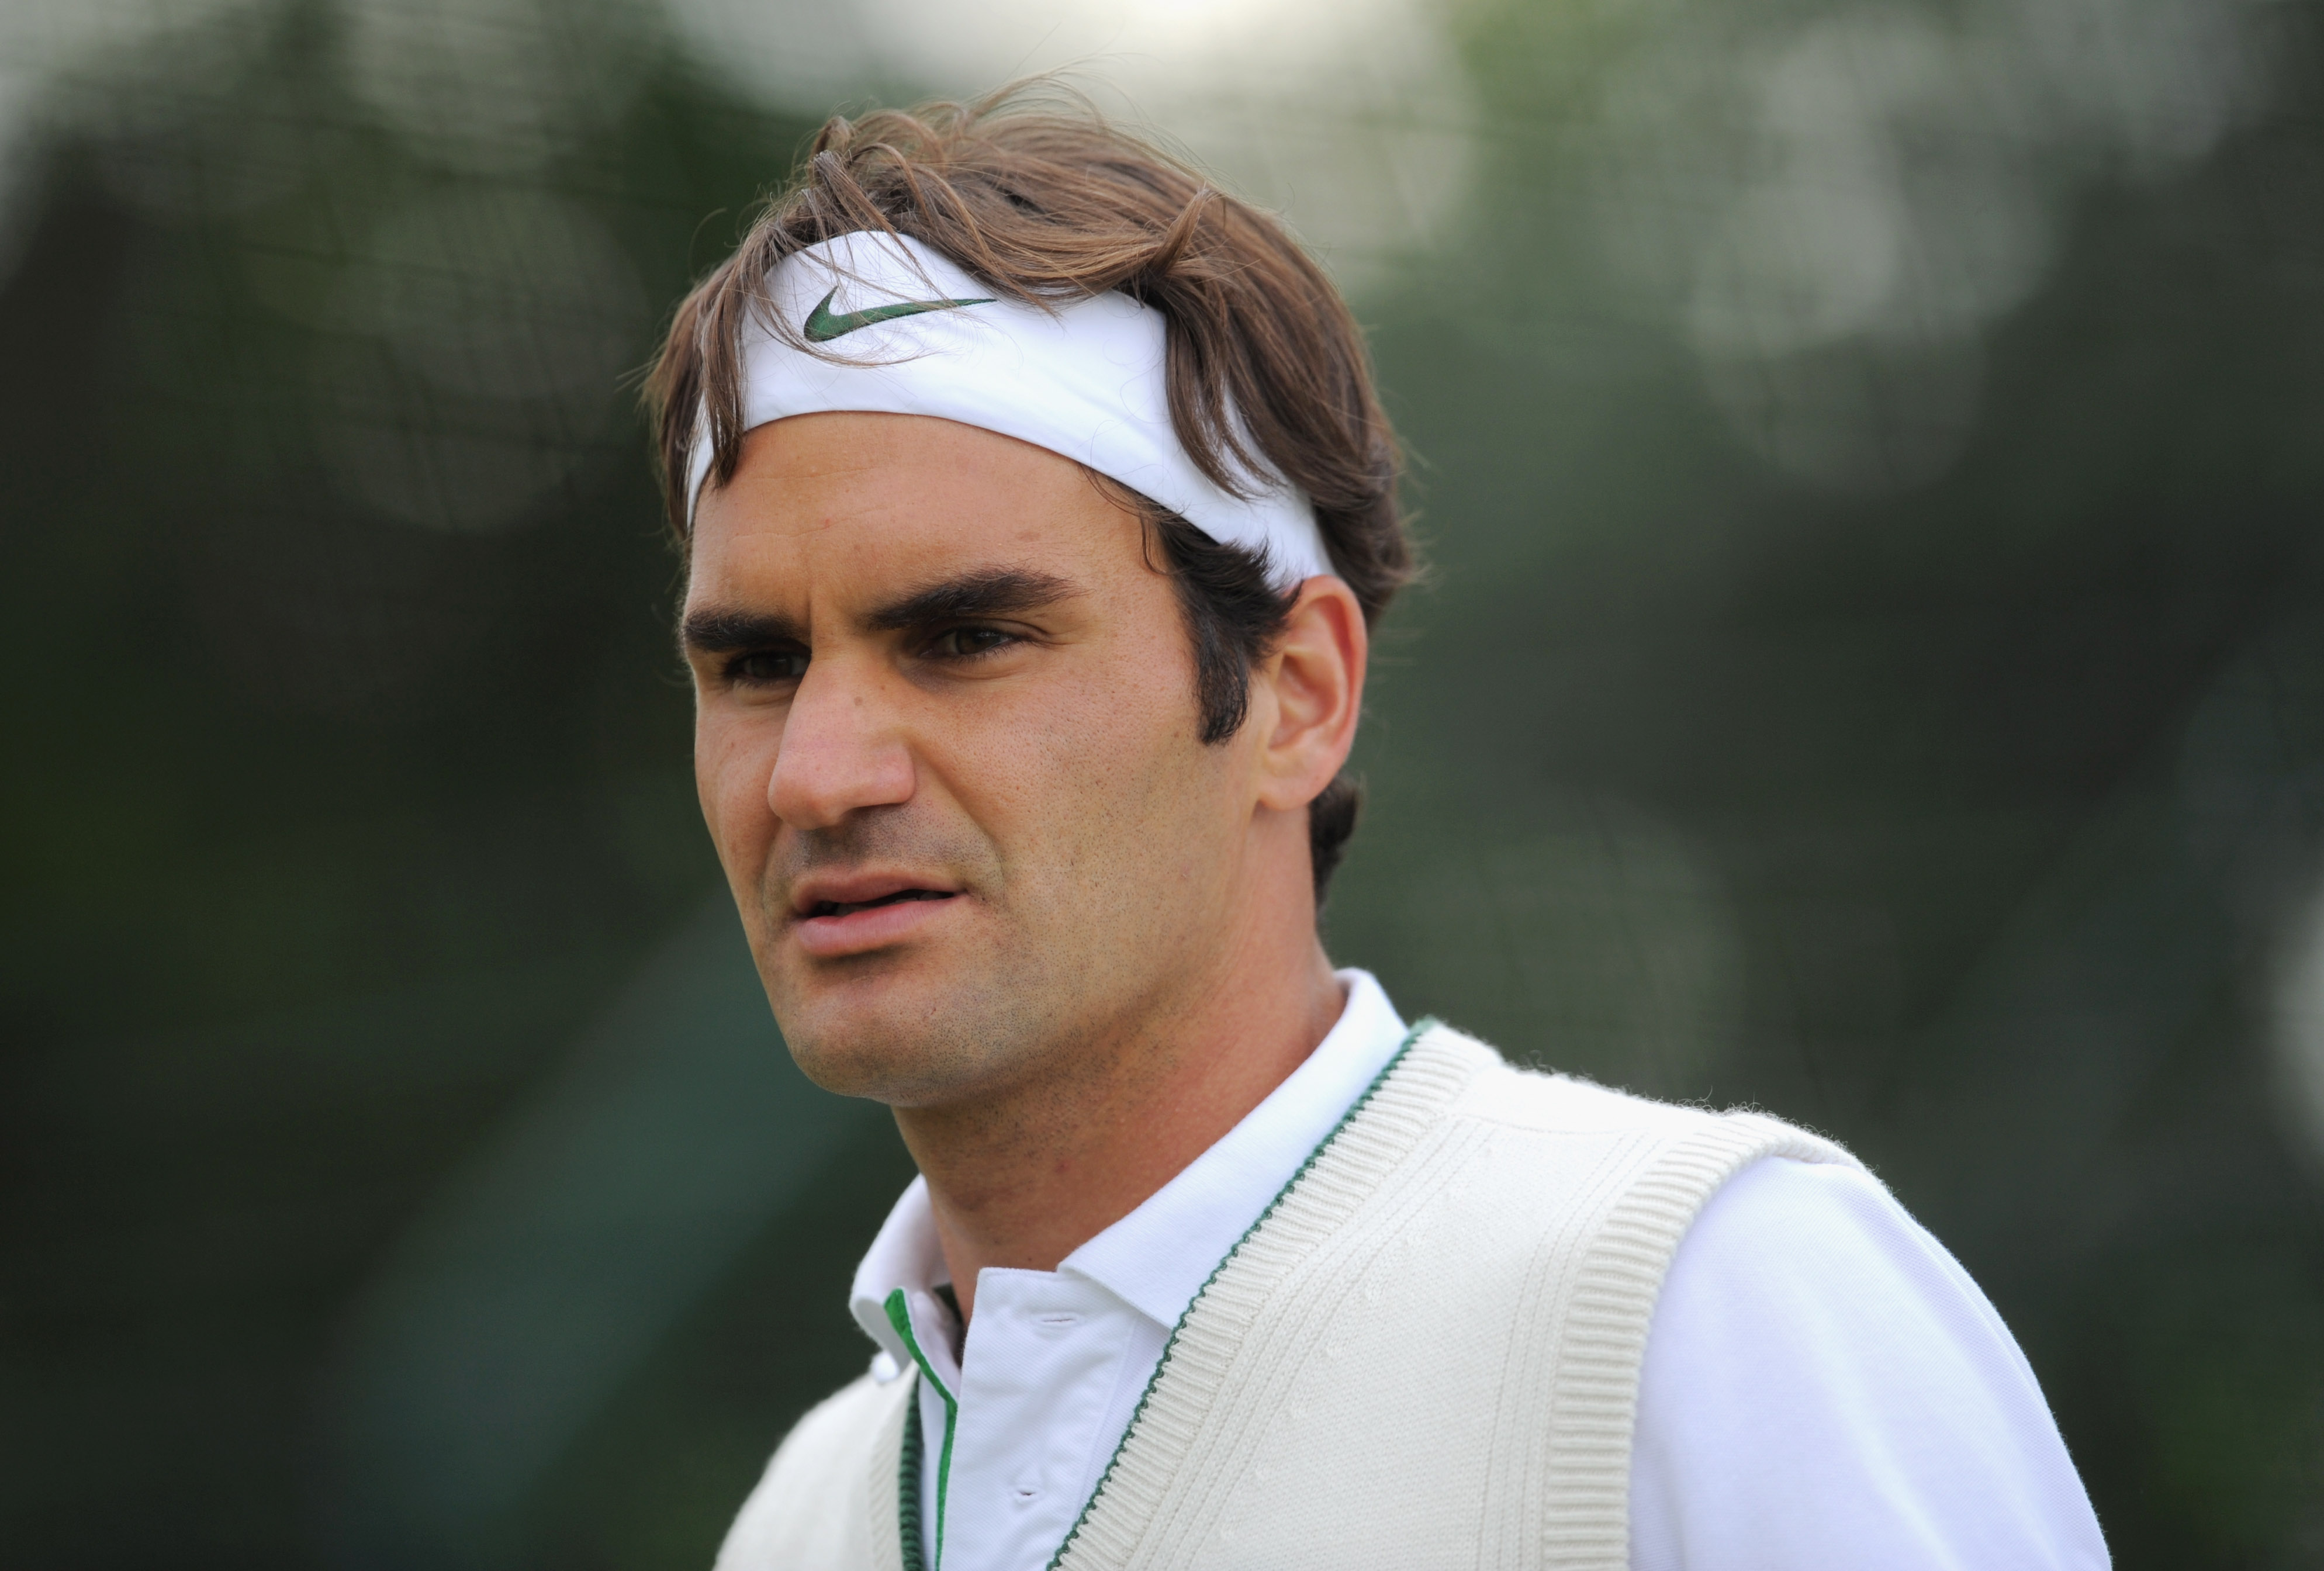 WIMBLEDON, ENGLAND - JUNE 19:  Roger Federer of Switzerland looks on during a training session ahead of the Wimbledon Lawn Tennis Championships on June 19, 2011 in Wimbledon, England.  (Photo by Michael Regan/Getty Images)